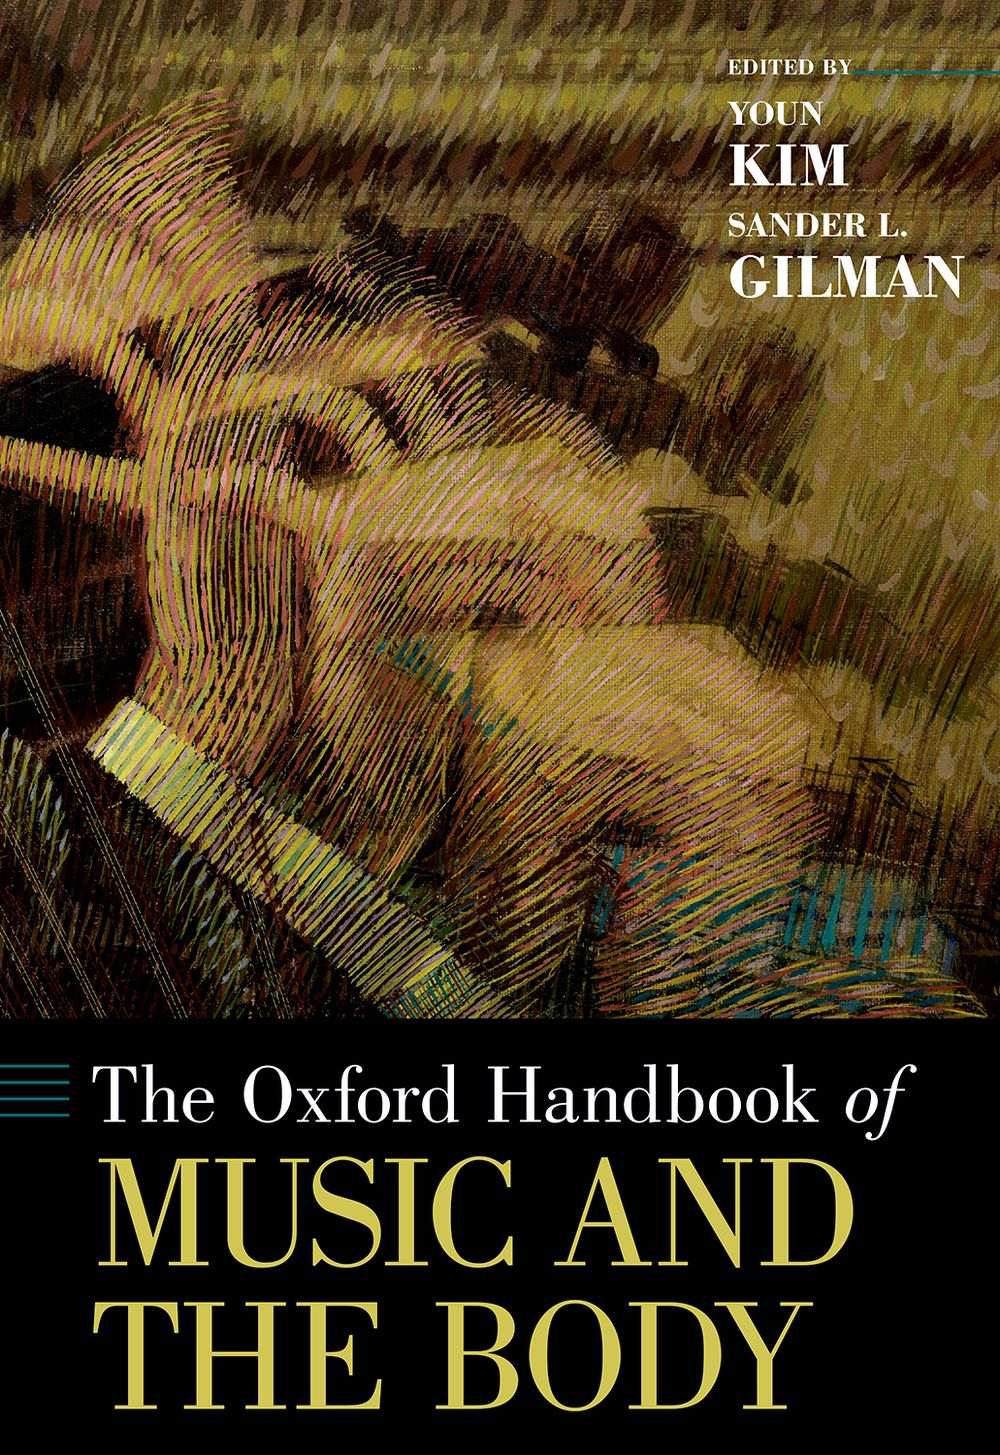 The Oxford Handbook of Music and the Body: Reference